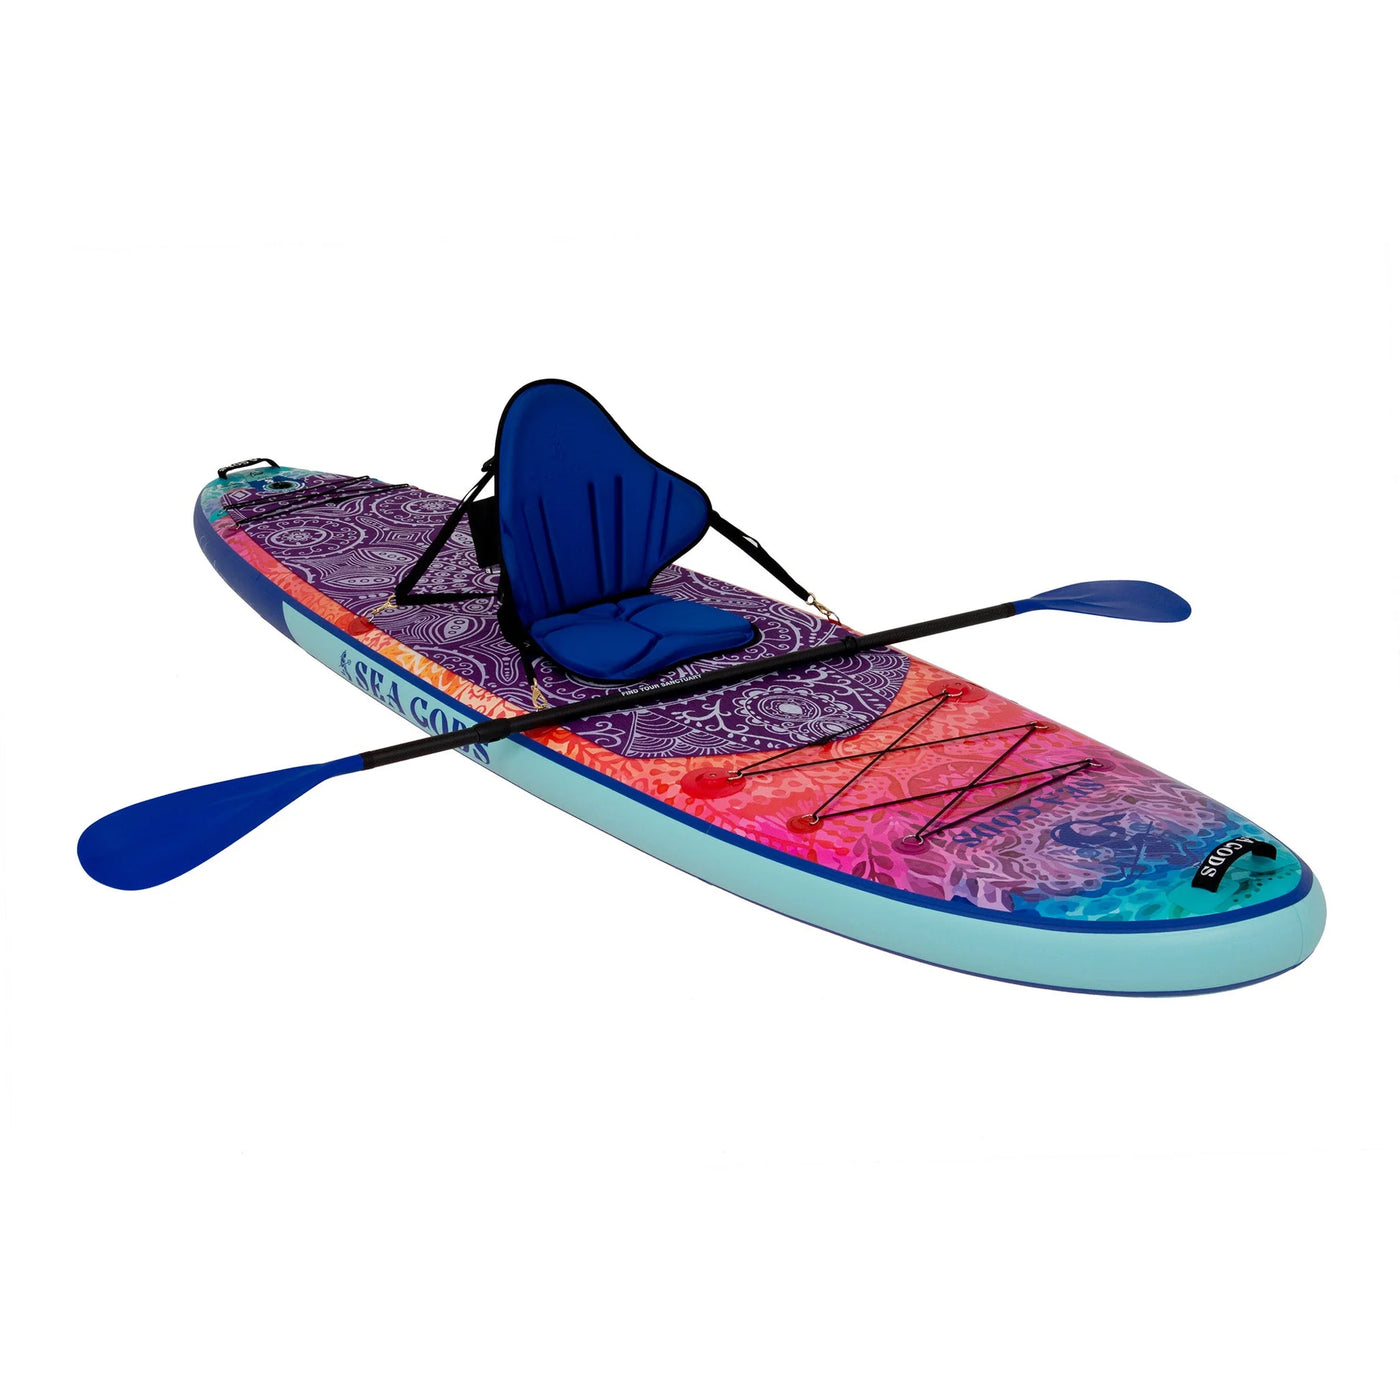 Diatom 10'6" - Inflatable Stand Up Paddleboard Package